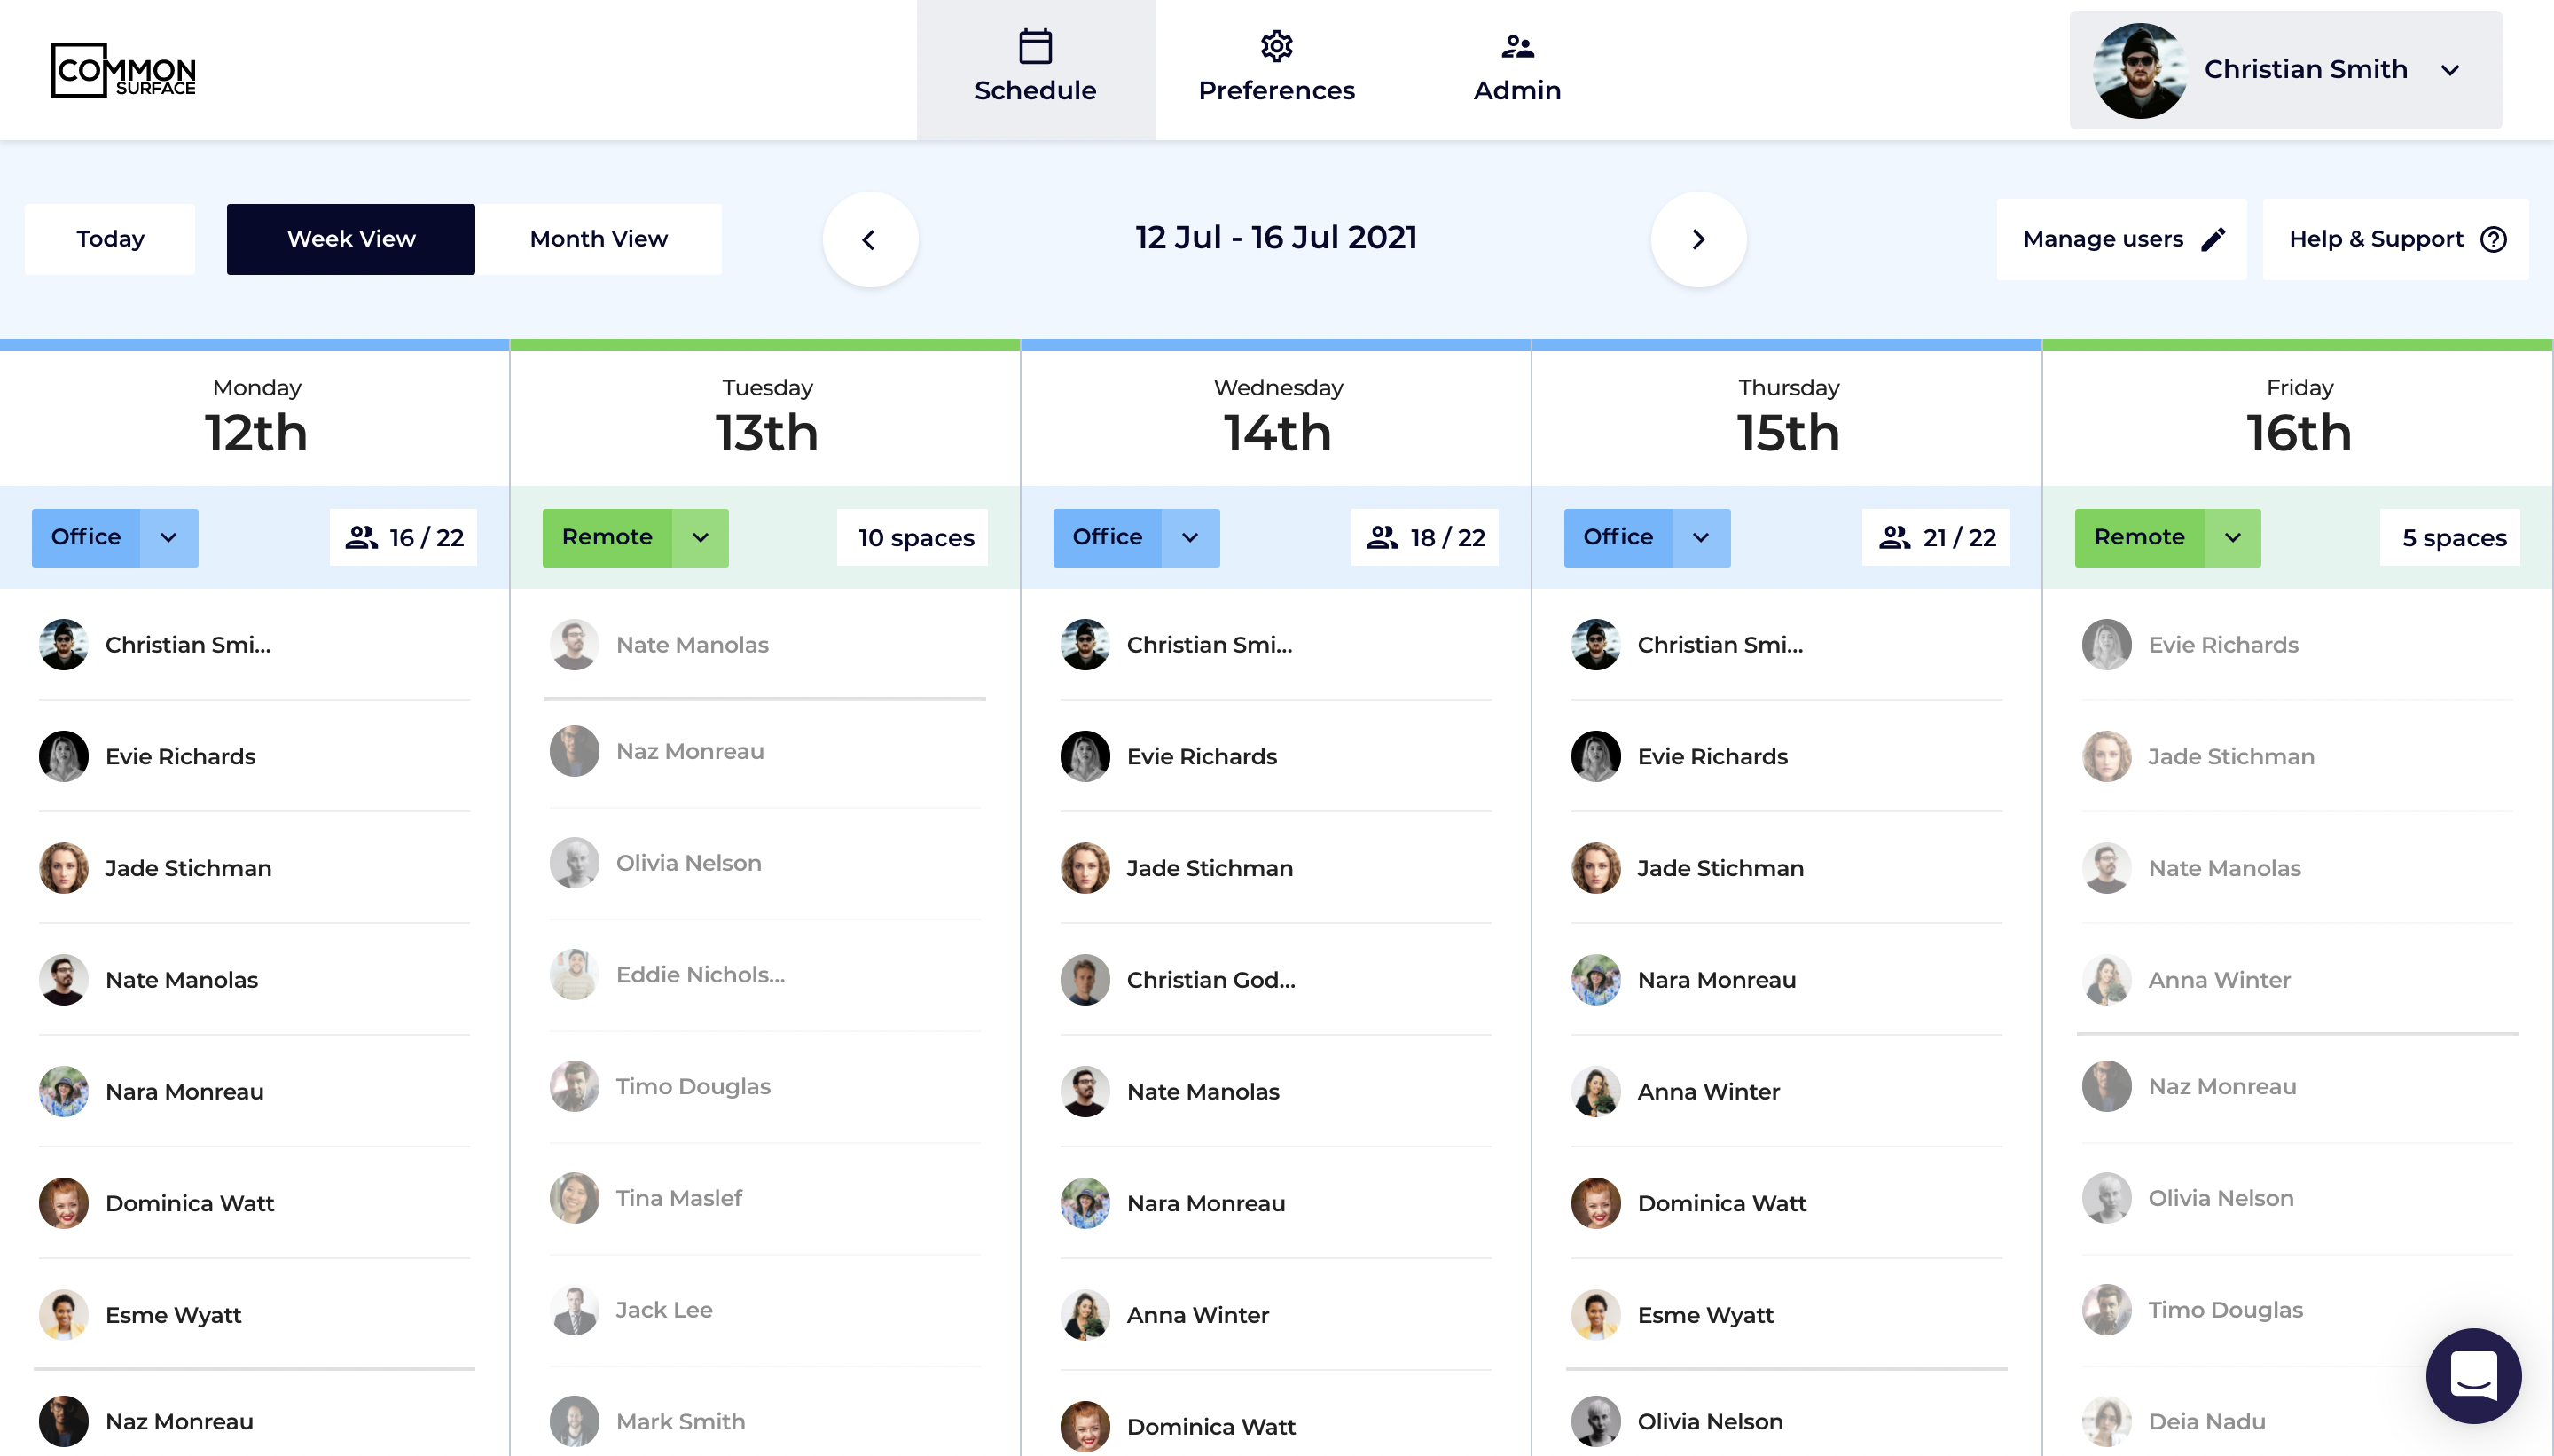 Common Surface generates a tailored interactive schedule for all employees, using their preferences, which shows them where they are working each day and provides visibility on who they are working with.